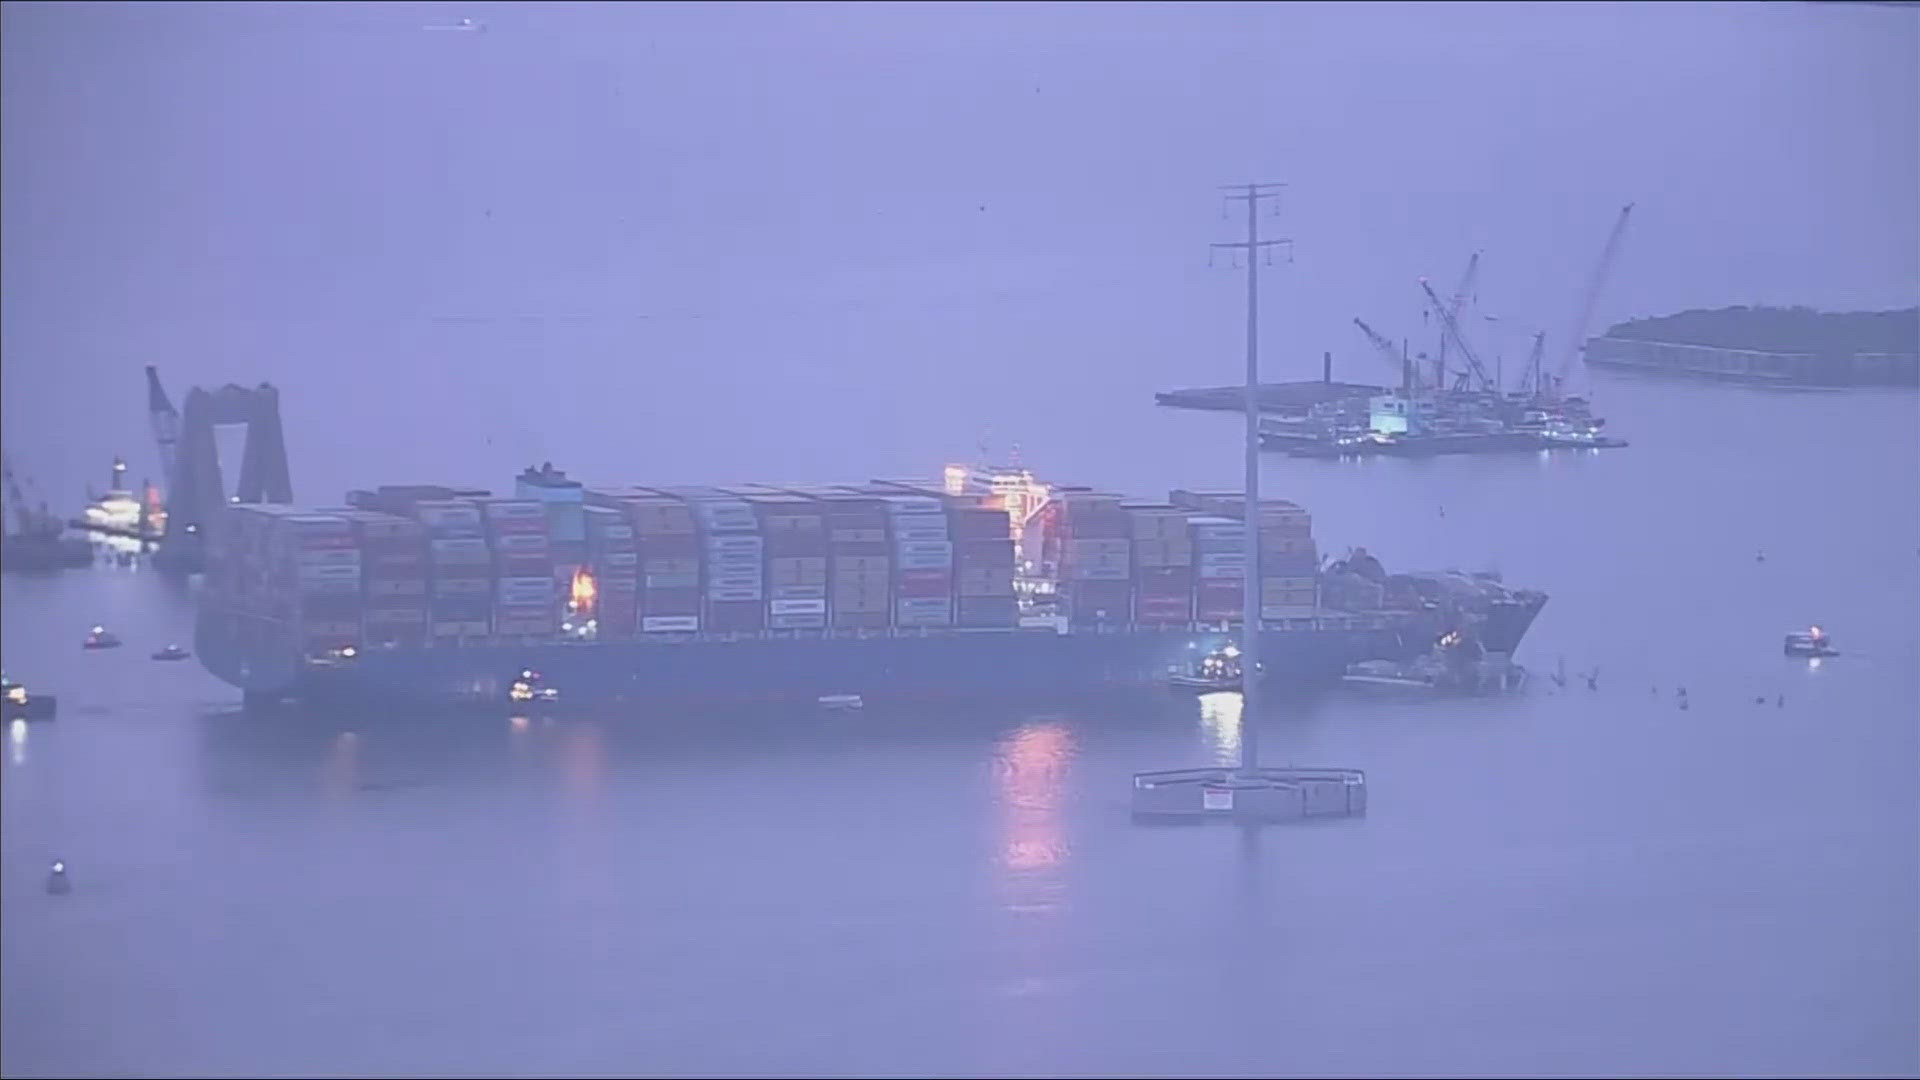 The ship will be hauled and moved to Baltimore's marine terminal.